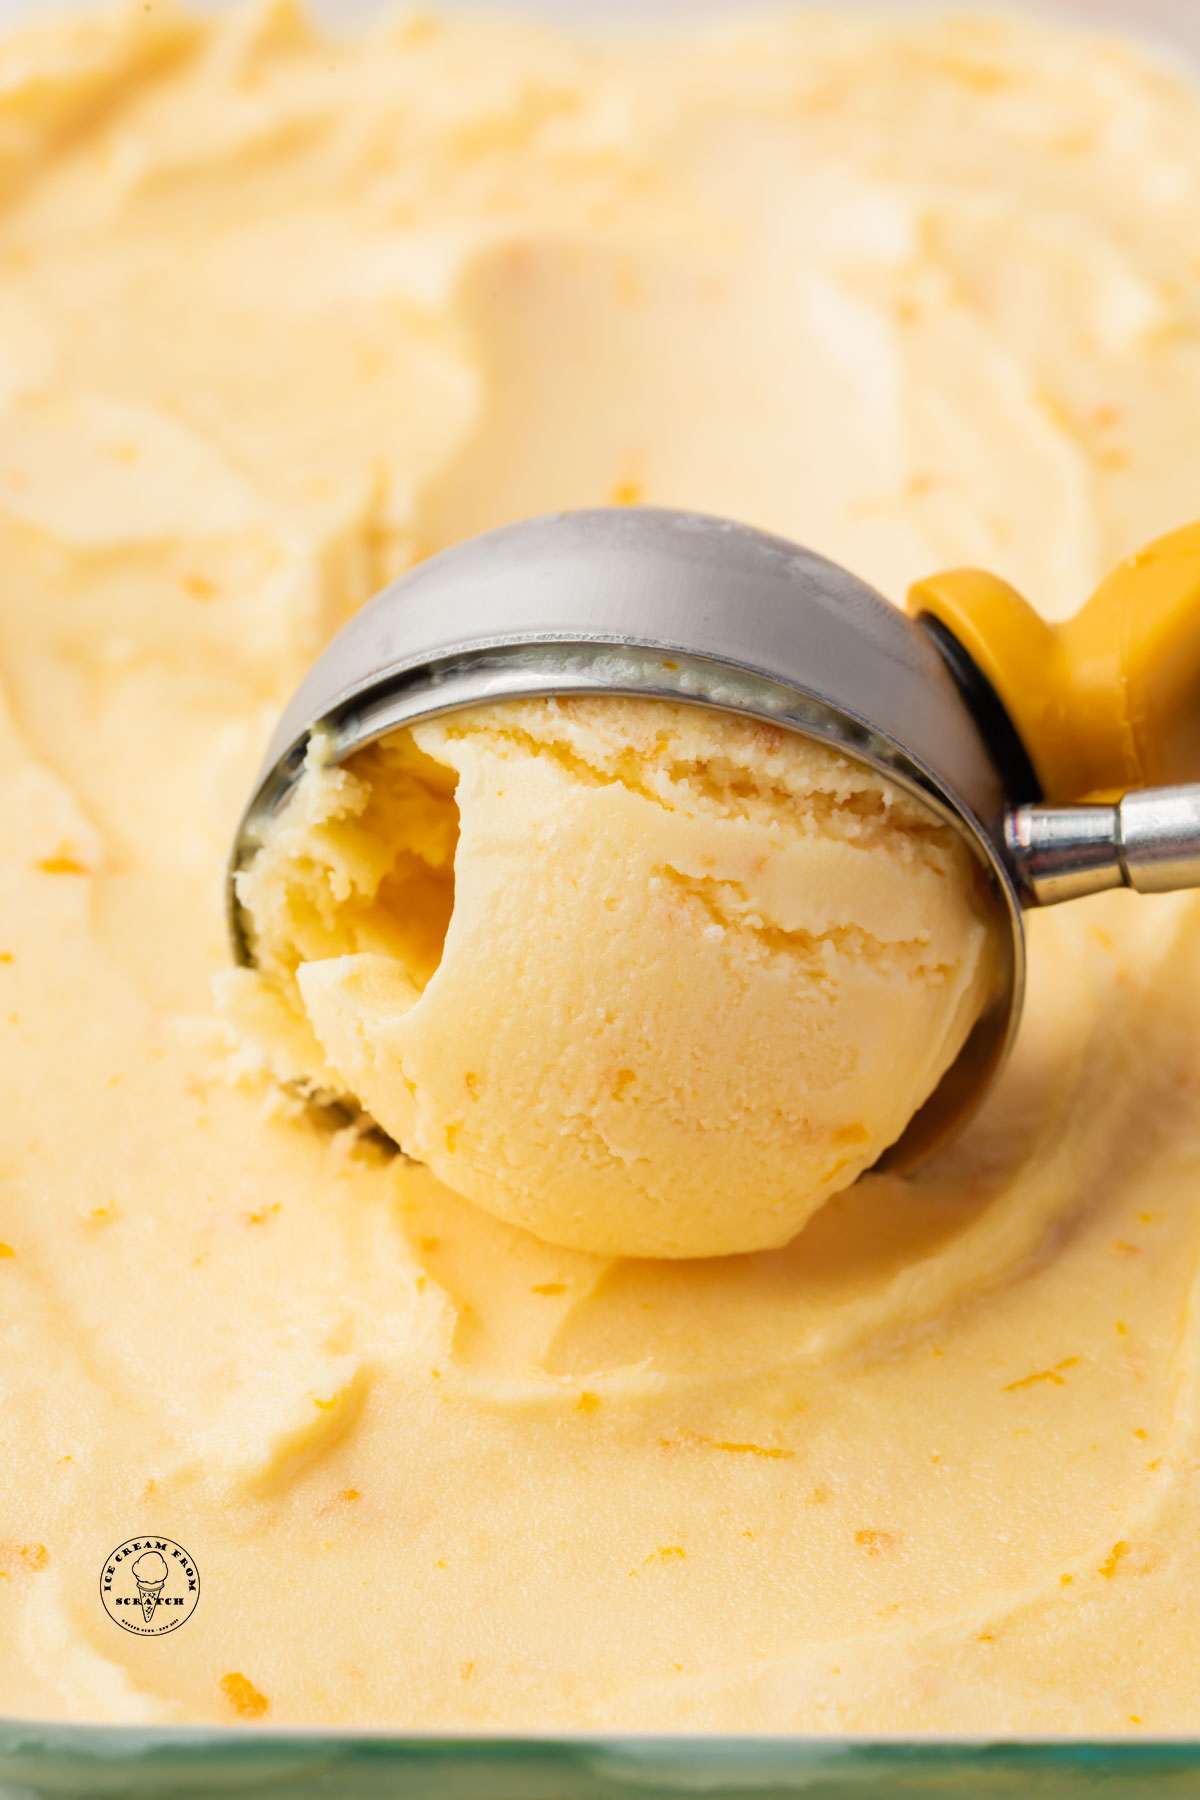 a scoop pulling up a serving of homemade creamy orange ice cream.